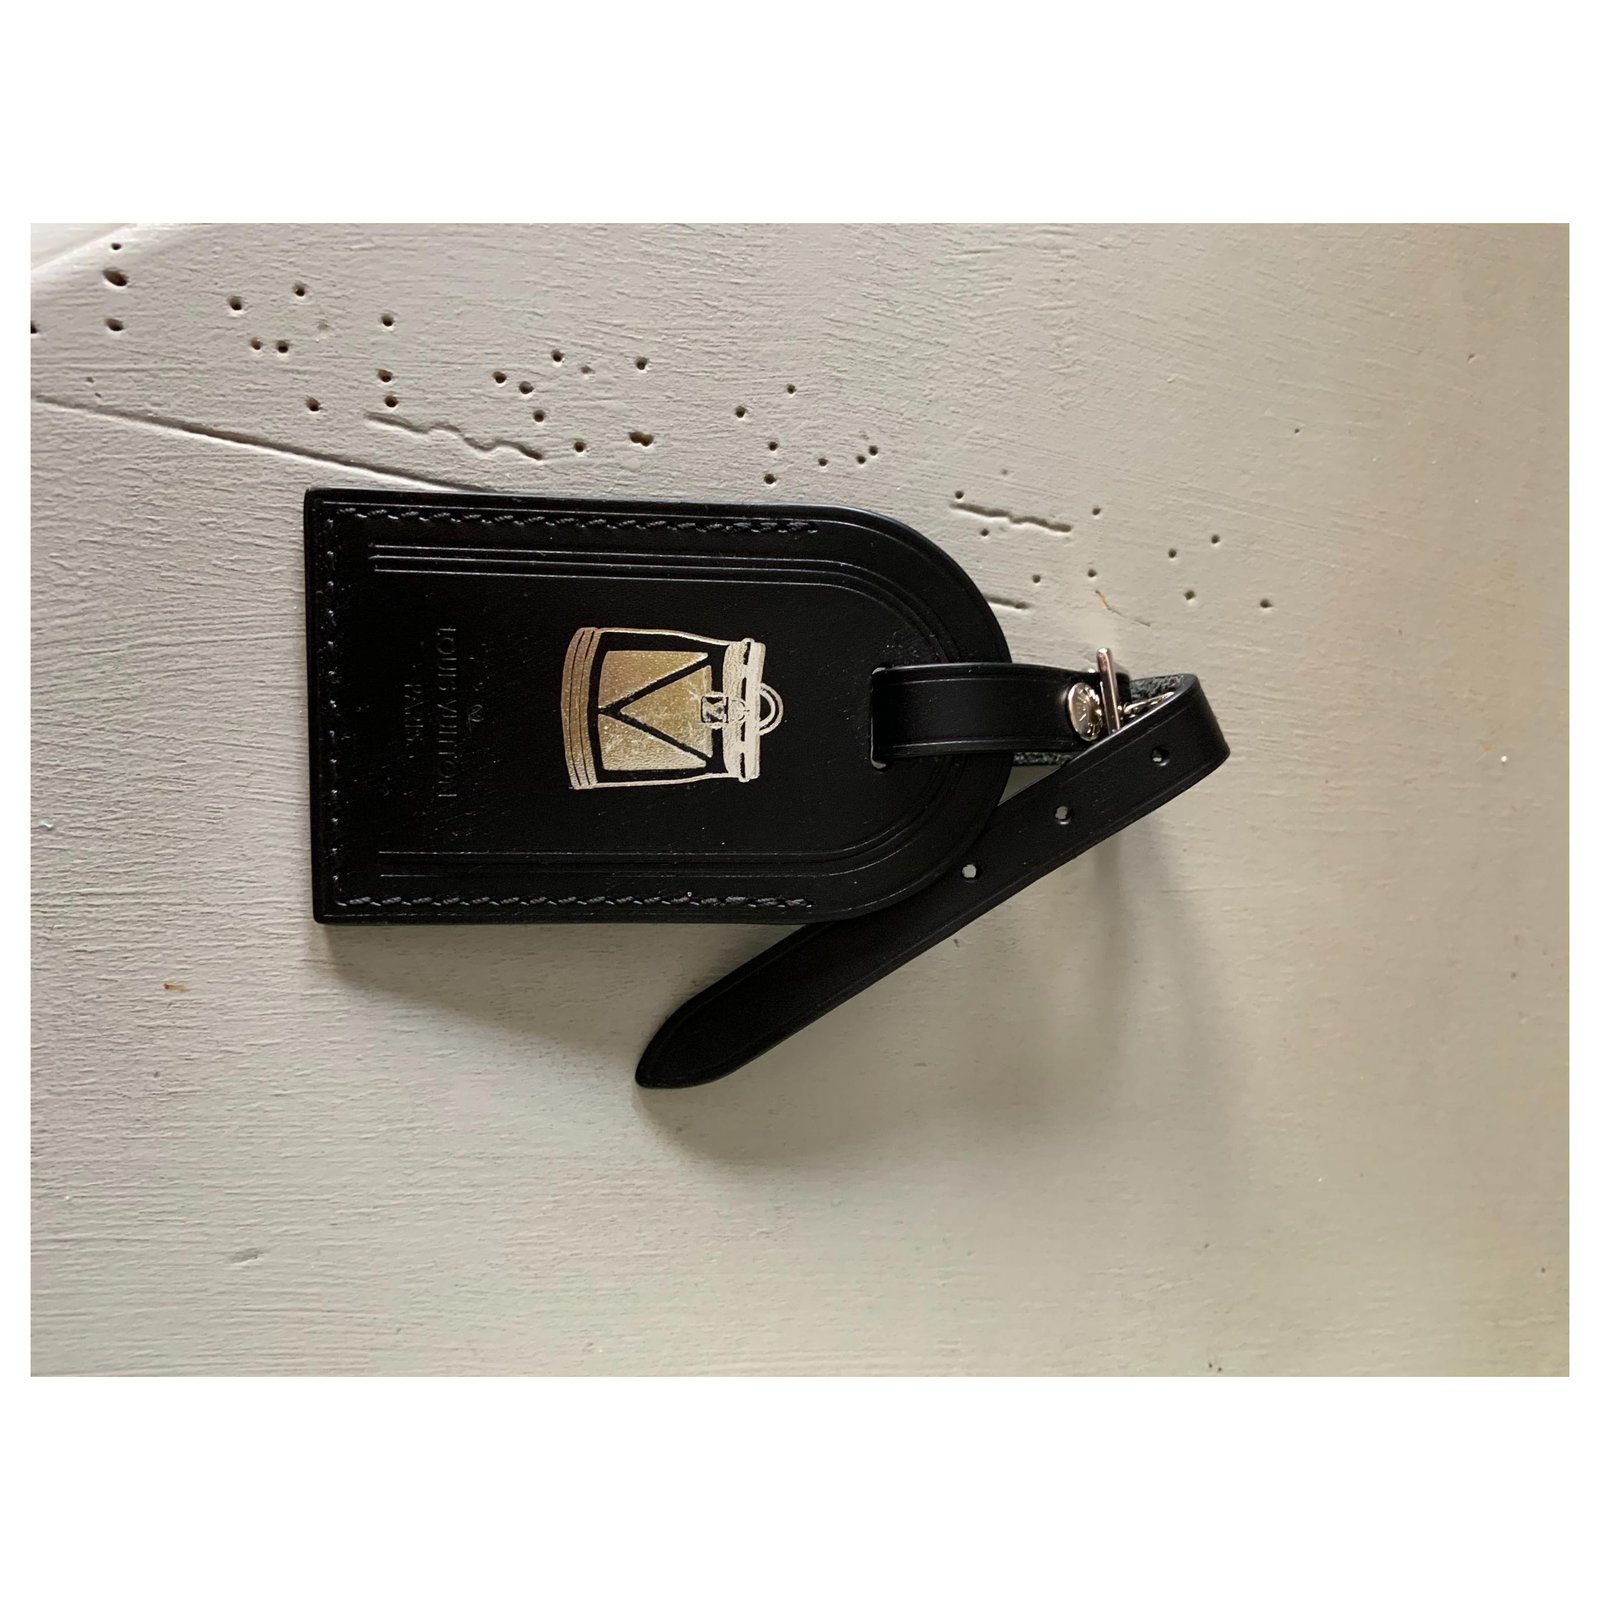 Louis Vuitton Luggage tag black large size hot stamped Madrid Time